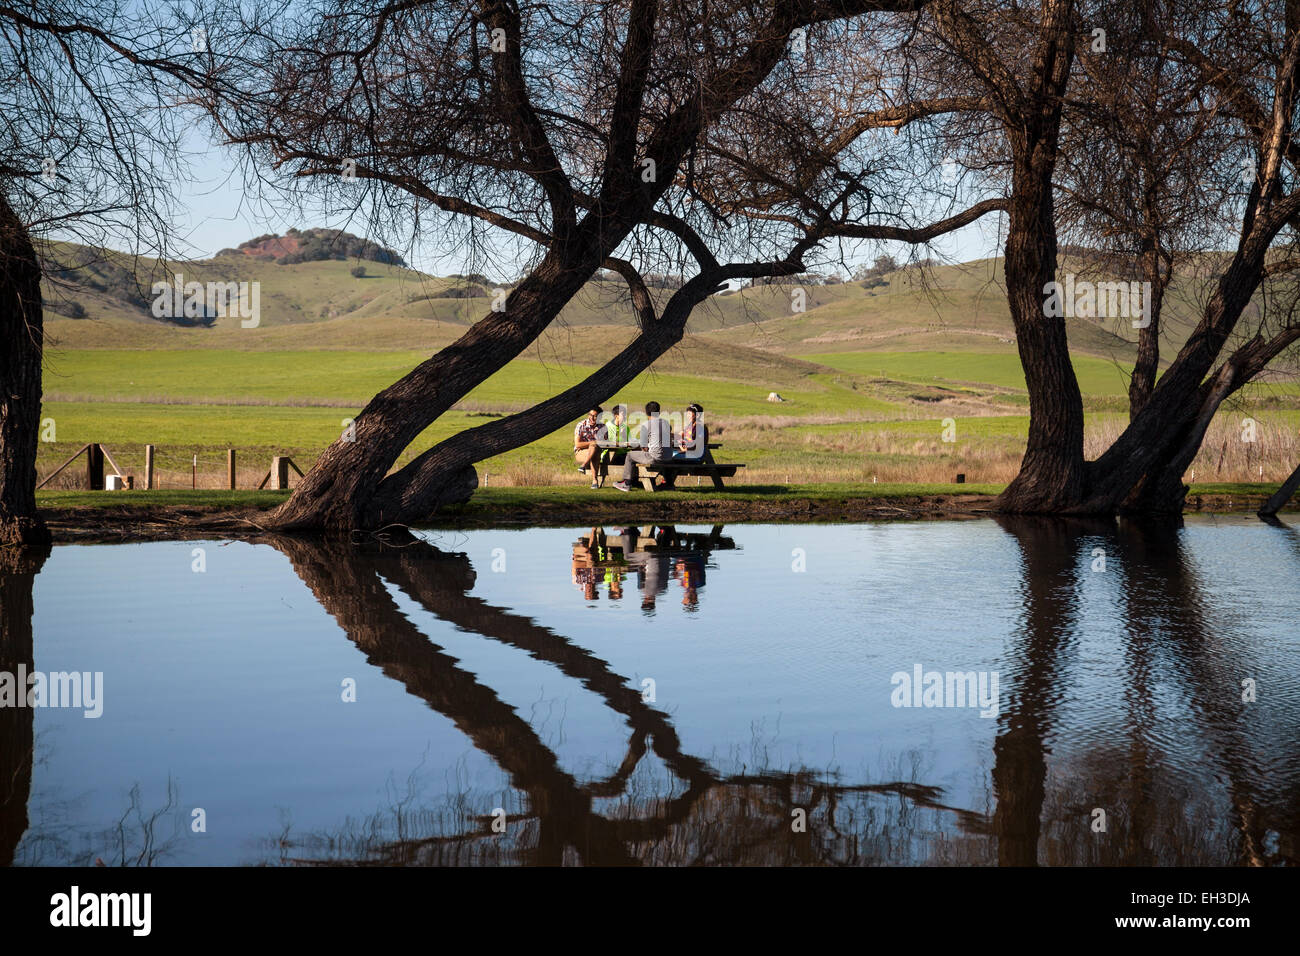 Friends having fun at a picnic by the pond by the Cheese Factory, Petaluma, California, USA Stock Photo